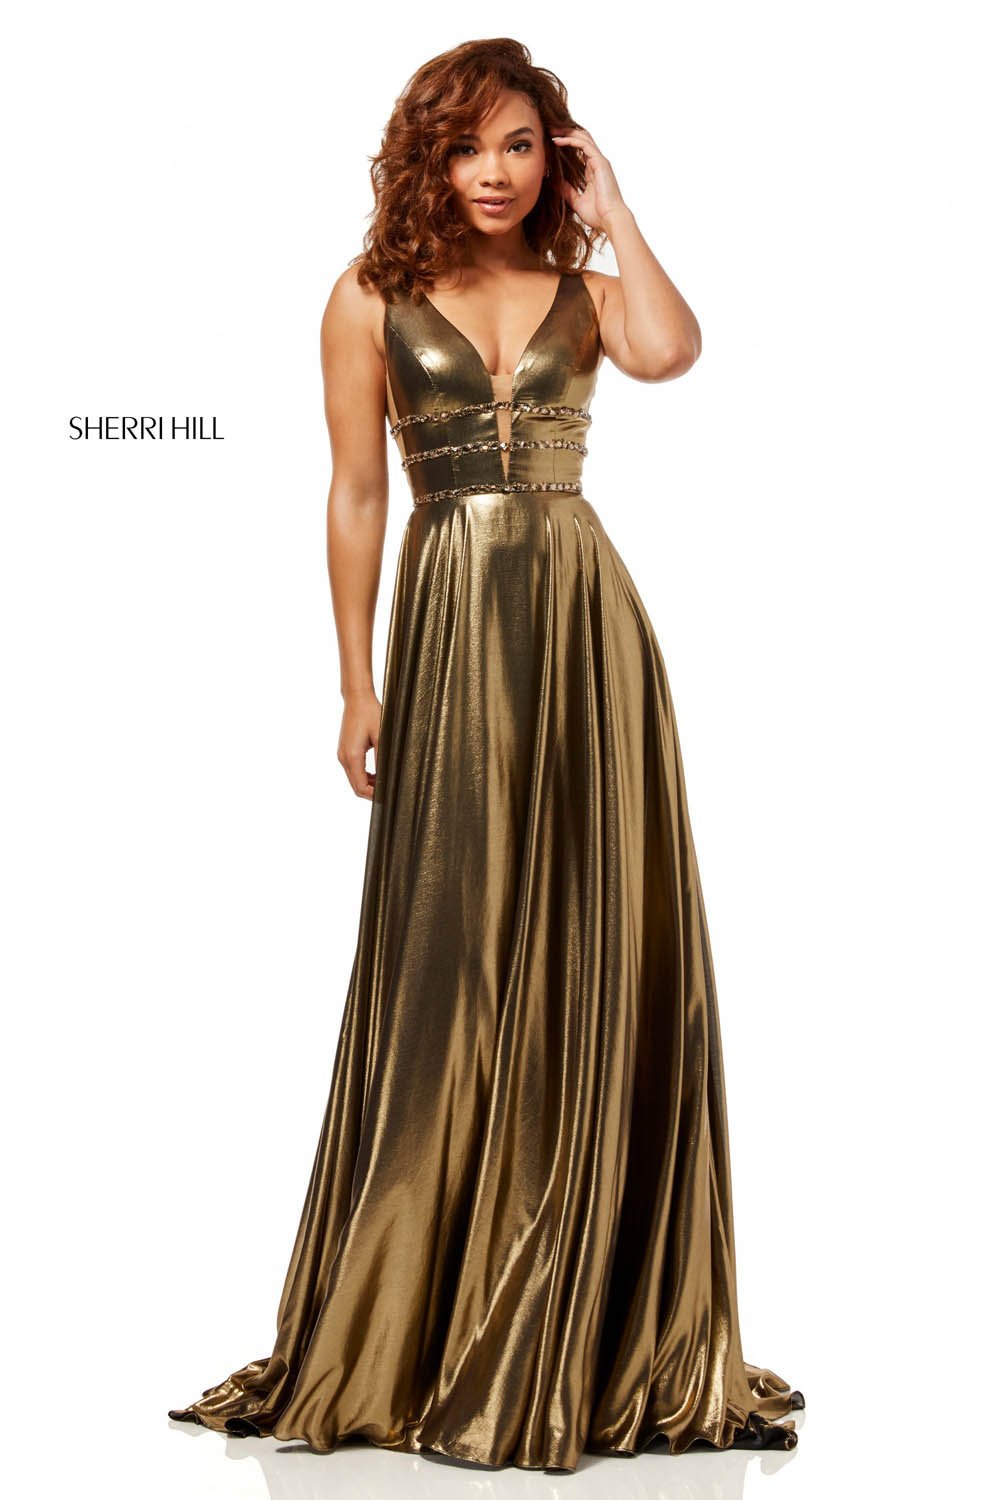 Sherri Hill 52421 dress images in these colors: Gold, Silver.